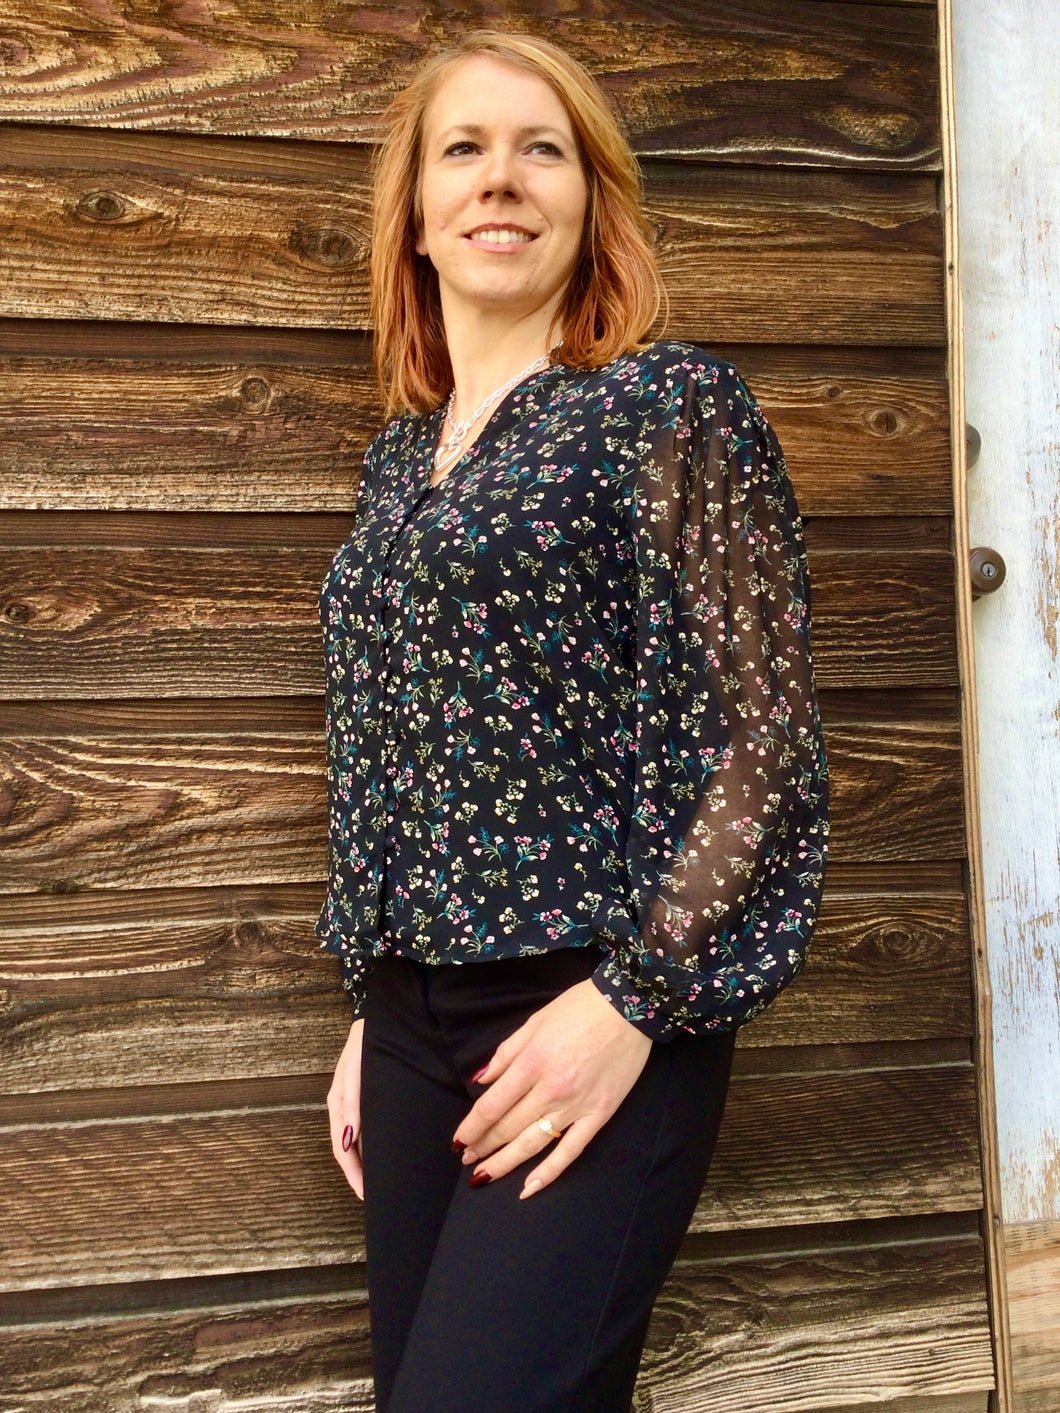 Apricot Floral Top in Black, Powell River, BC